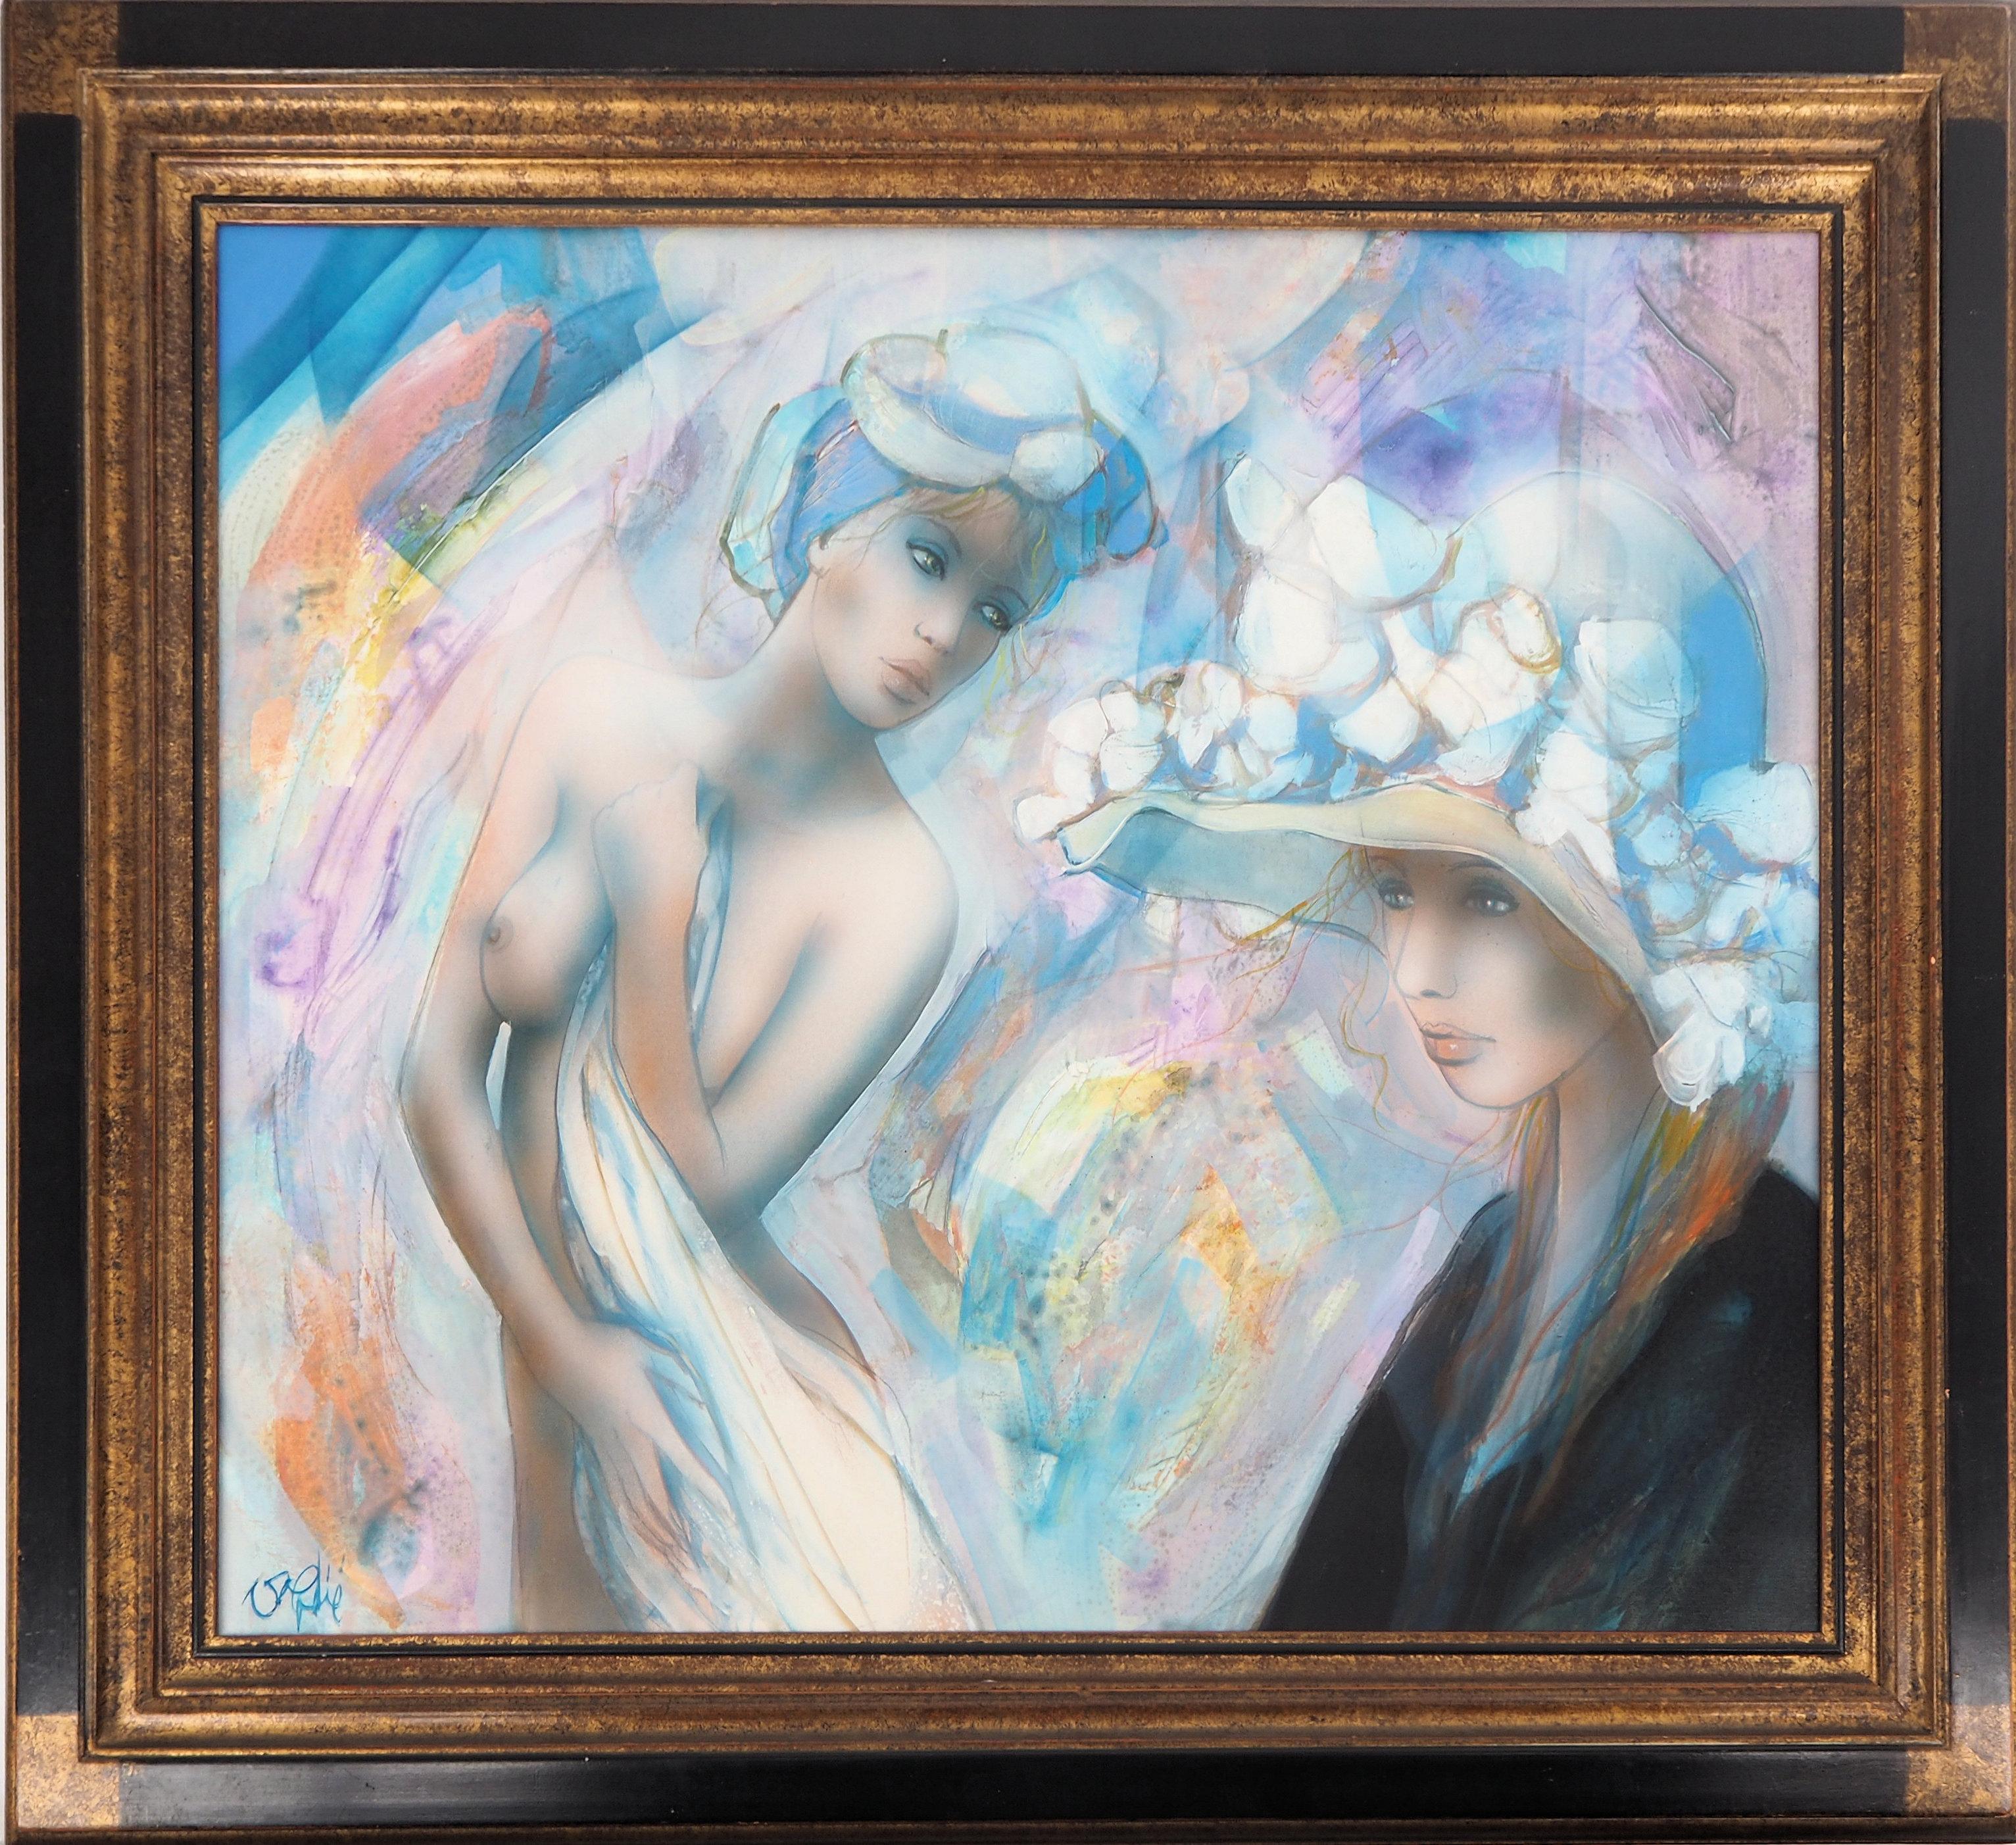 Jean-Baptiste Valadie Nude Painting - The Retro Hat - Handsigned oil on canvas